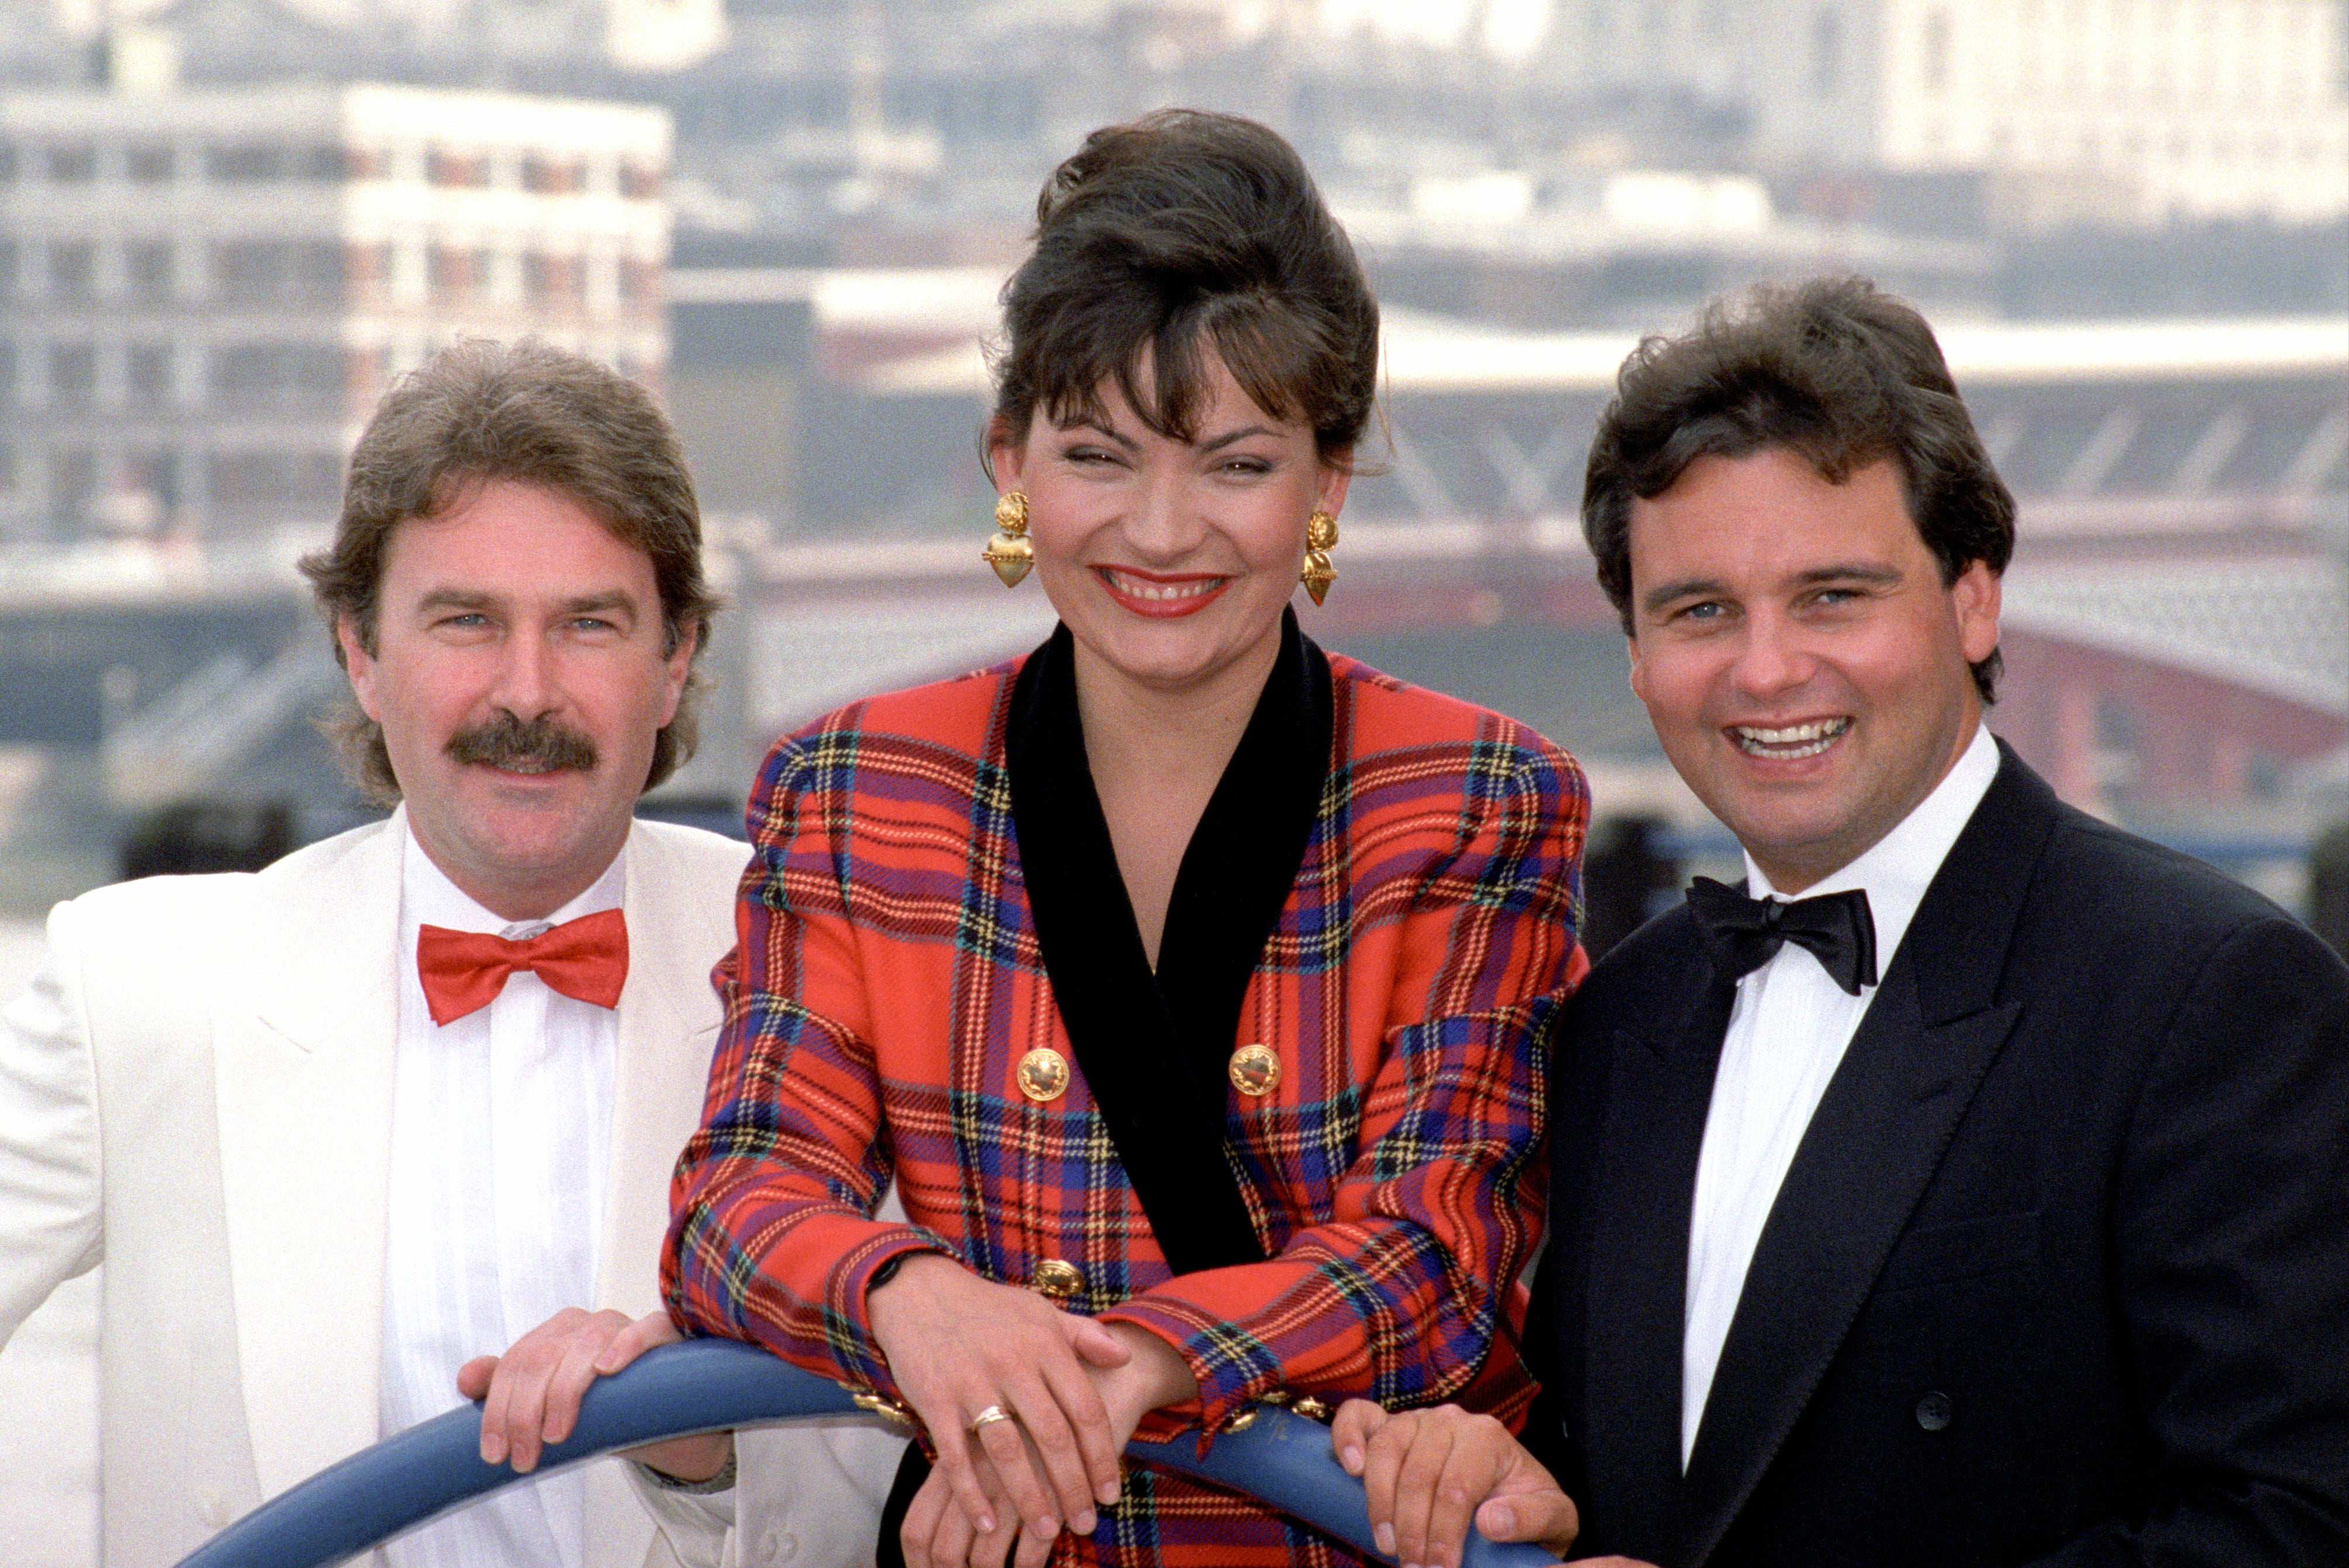 Kelly, pictured with ‘GMTV’ colleagues Michael Wilson and Eamonn Holmes, has been a fixture on ITV’s morning schedule for decades